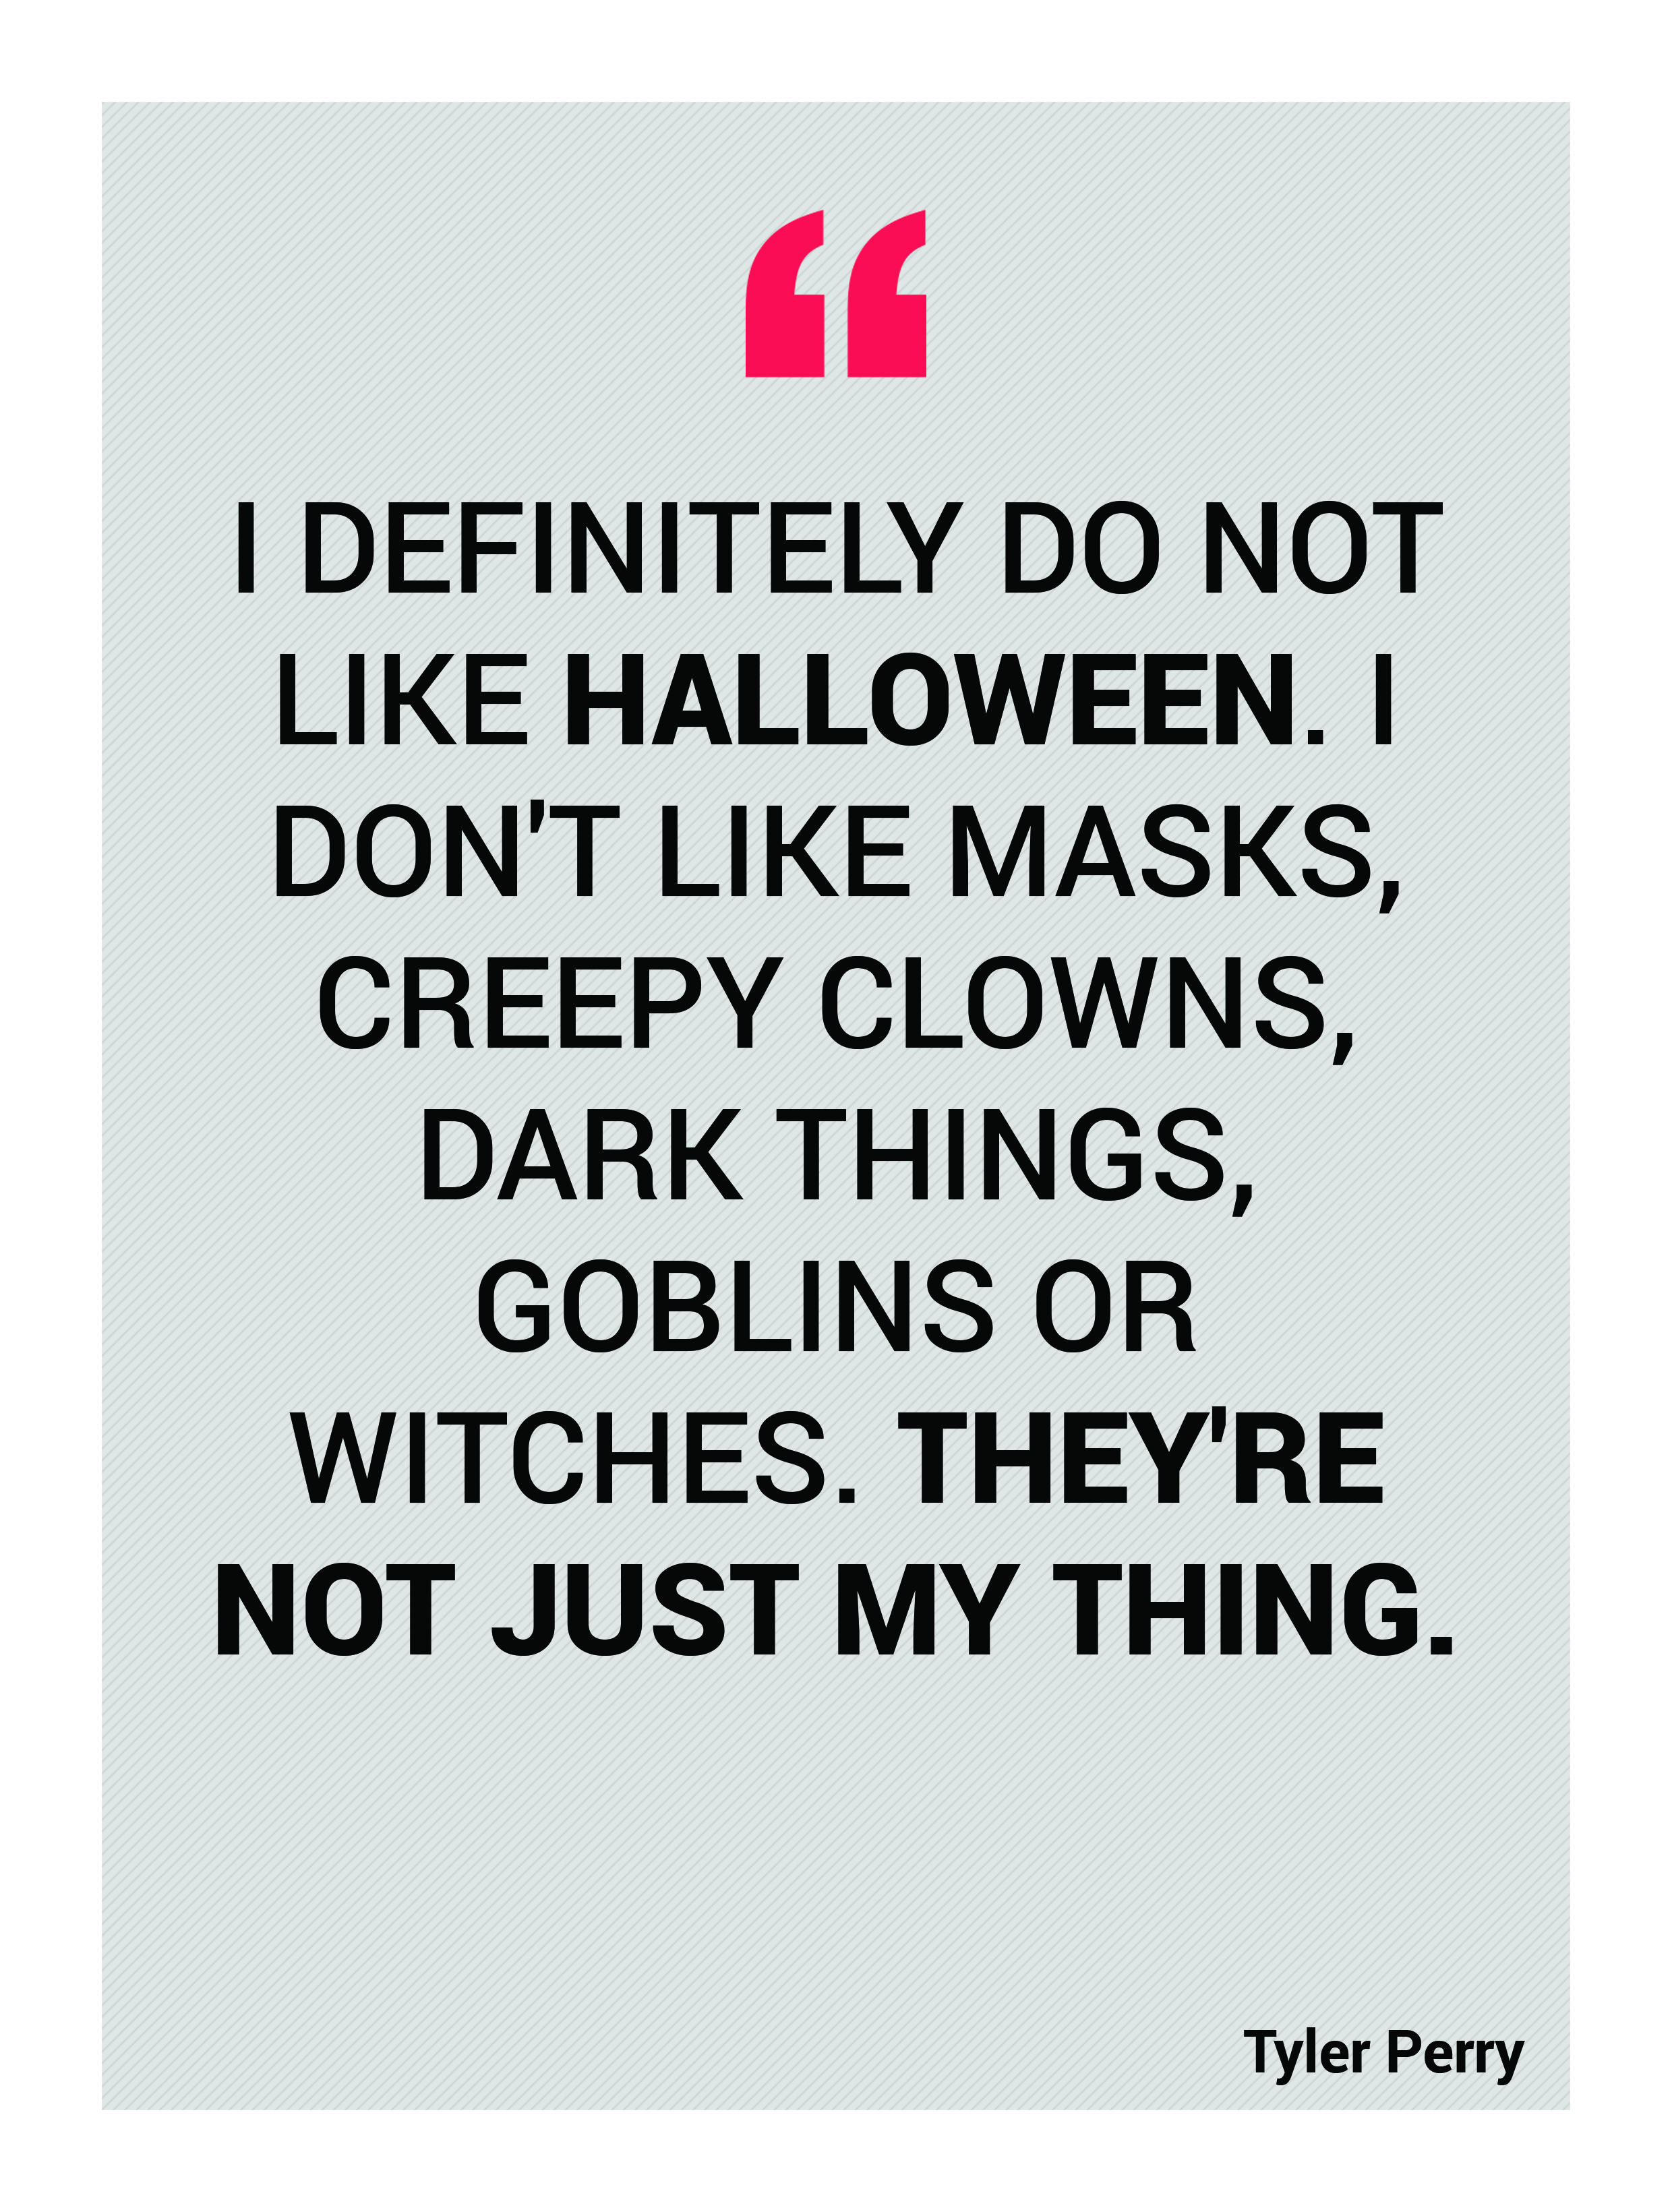 I definitely do not like Halloween. I don't like masks, creepy clowns, dark things, goblins or witches. They're not just my thing. Tyler Perry